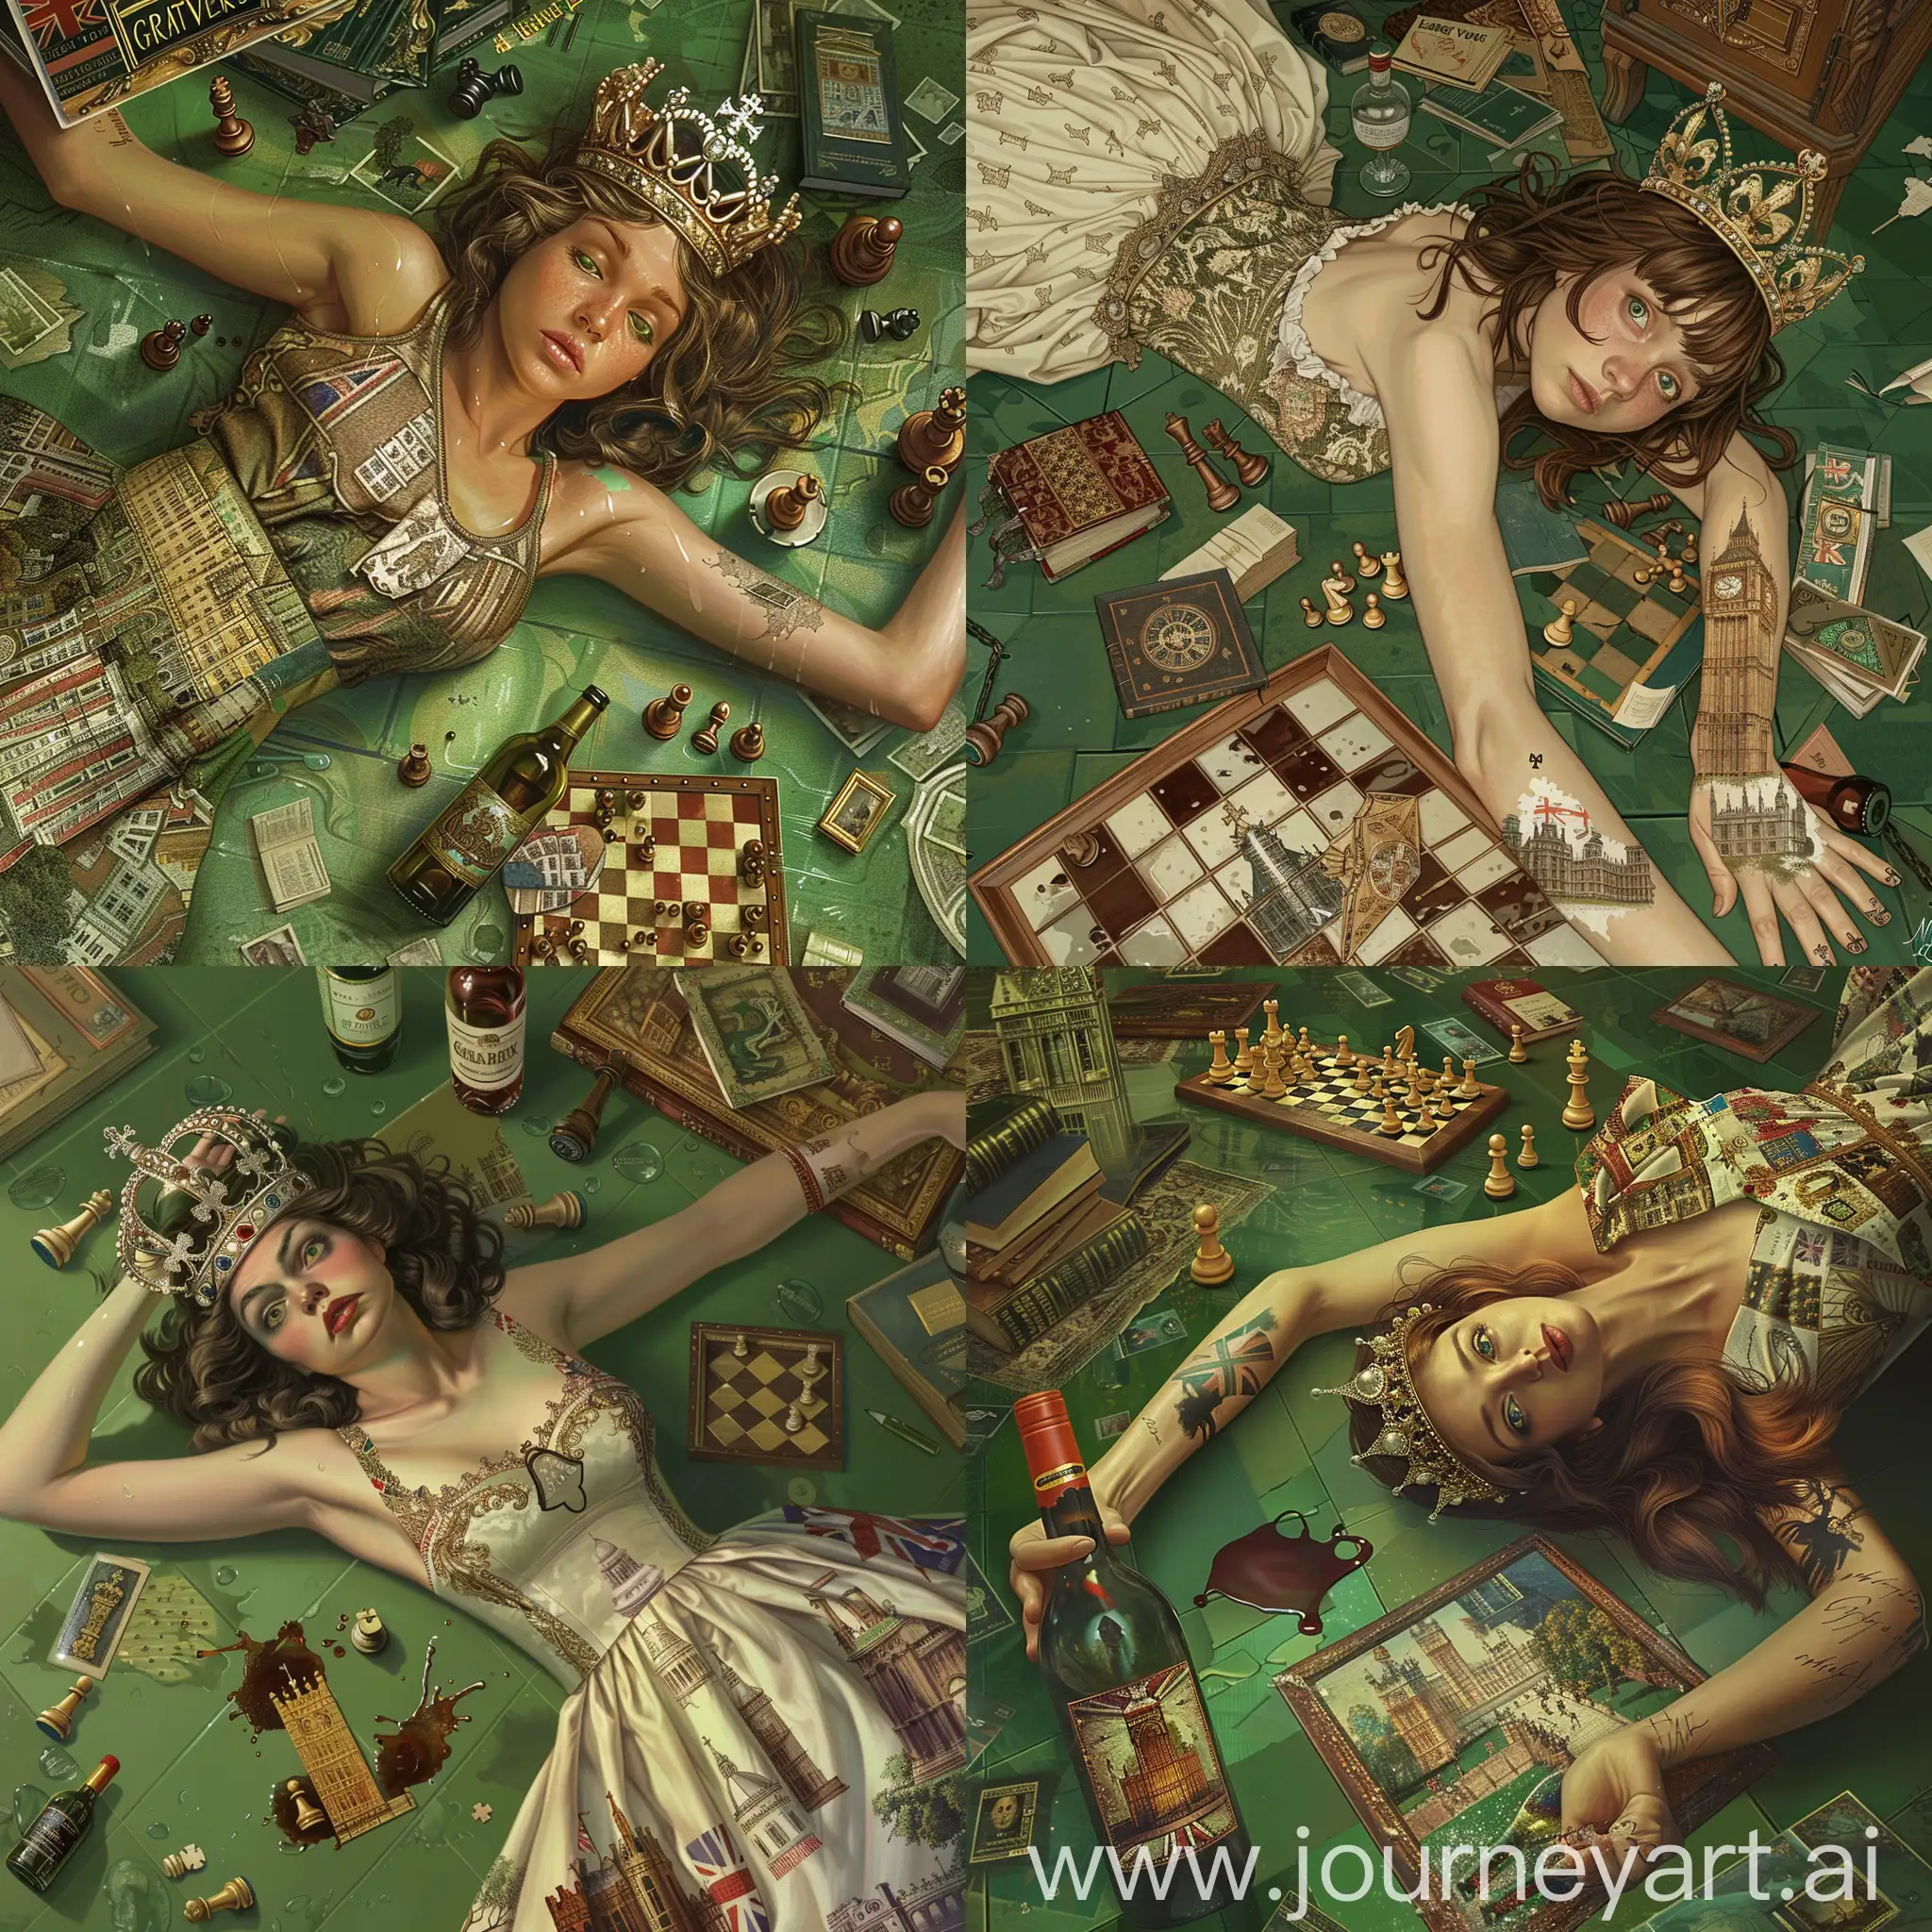 Woman is lying on the floor, one arm stretched along her body. She wears monarcy round crown of Great Britain on her head. The girl has a calm face, green eyes, and brown hair, face very smart and indifferent. Nearby lies a chessboard, spilled bottle of wine, and books. The floor is green, with harmonious and beautiful colors, creating an atmosphere of intellectuality. The girl wears a dress covered her hands print with Big Ben and Buckingham Palace.  renaissance illustration, showcasing stunning intricate detail, style of leonardo da vinci, dramatic